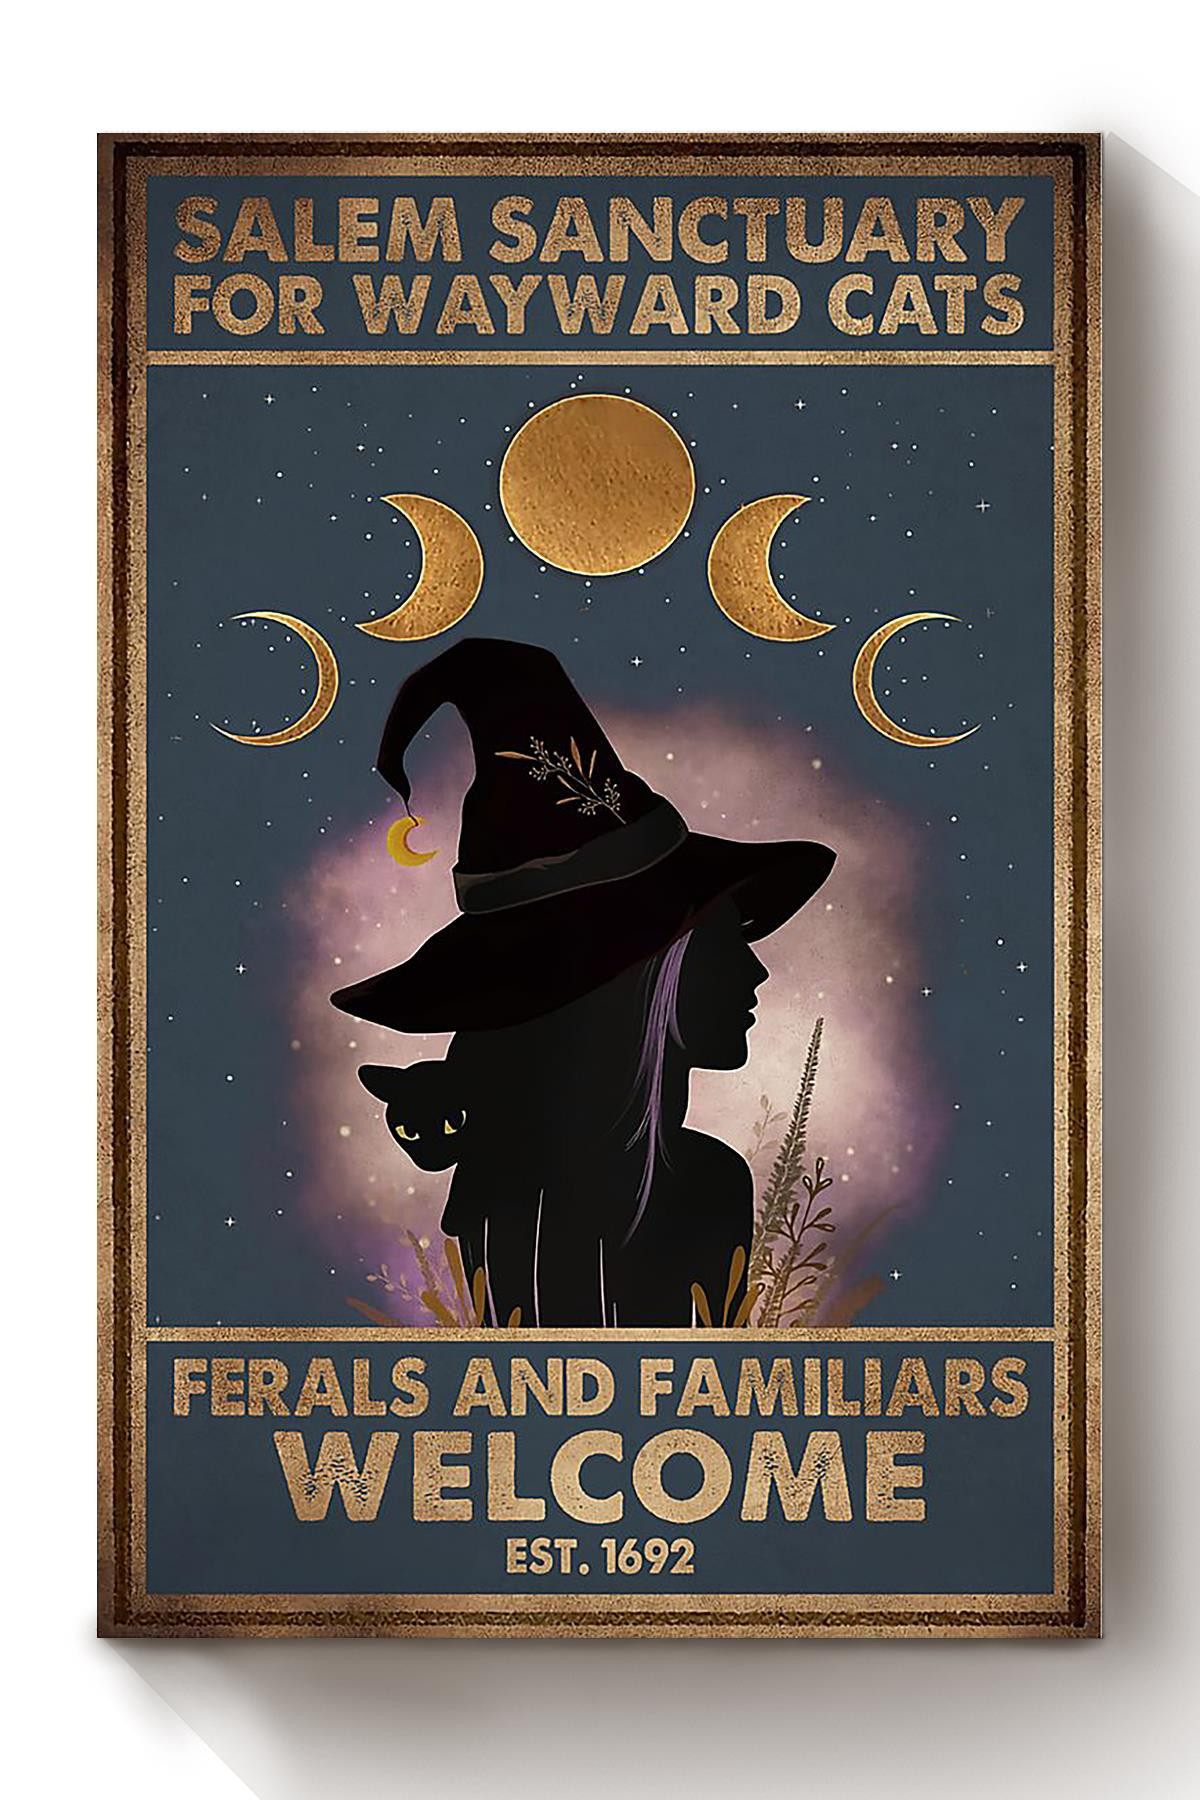 Black Cat Salem Sanctualy For Wayward Cats Animal Gift For Cat Lover International Cat Day Halloween Decor Kitten Foster Canvas Framed Prints, Canvas Paintings Wrapped Canvas 8x10